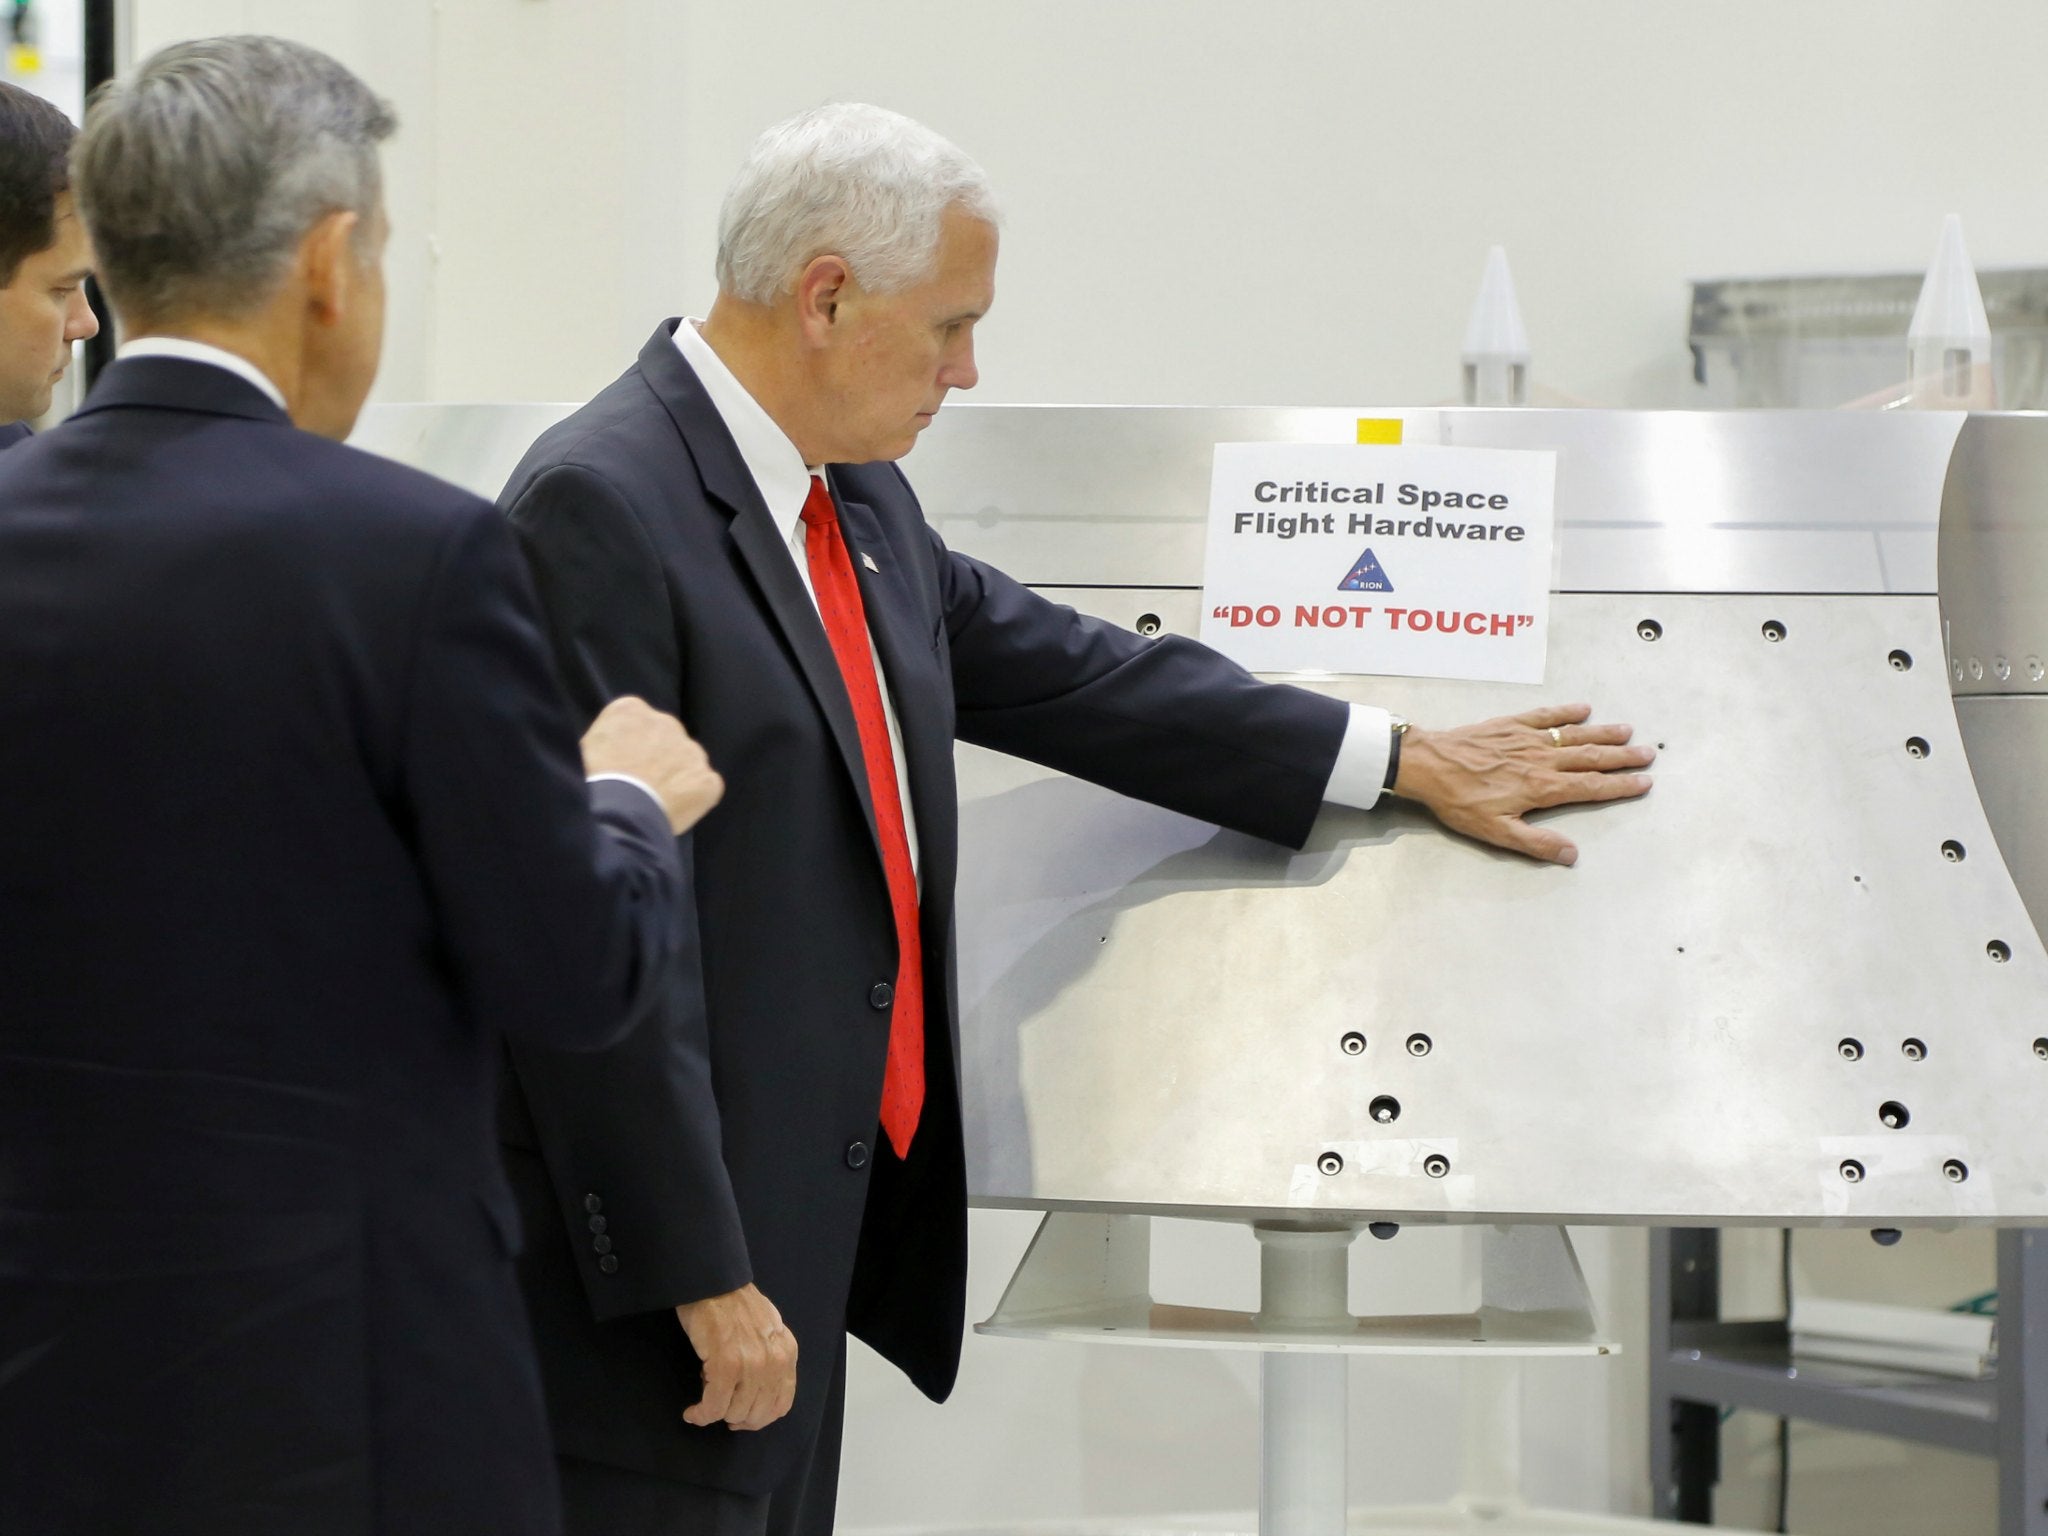 The Vice President got in on the joke after a picture of him touching a piece of Nasa equipment went viral